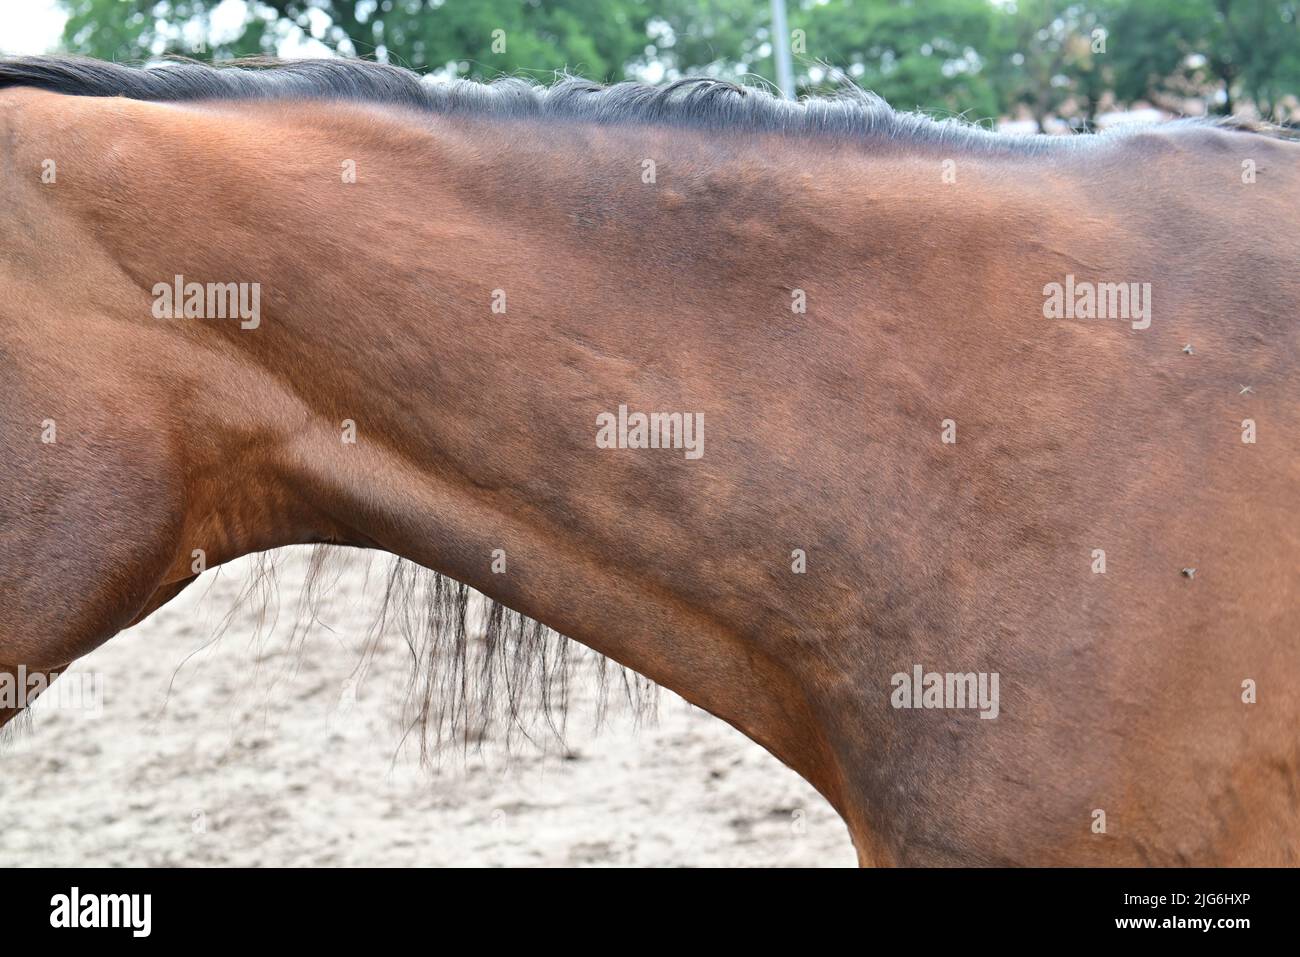 Hives or allergic wheels on a horses neck Stock Photo